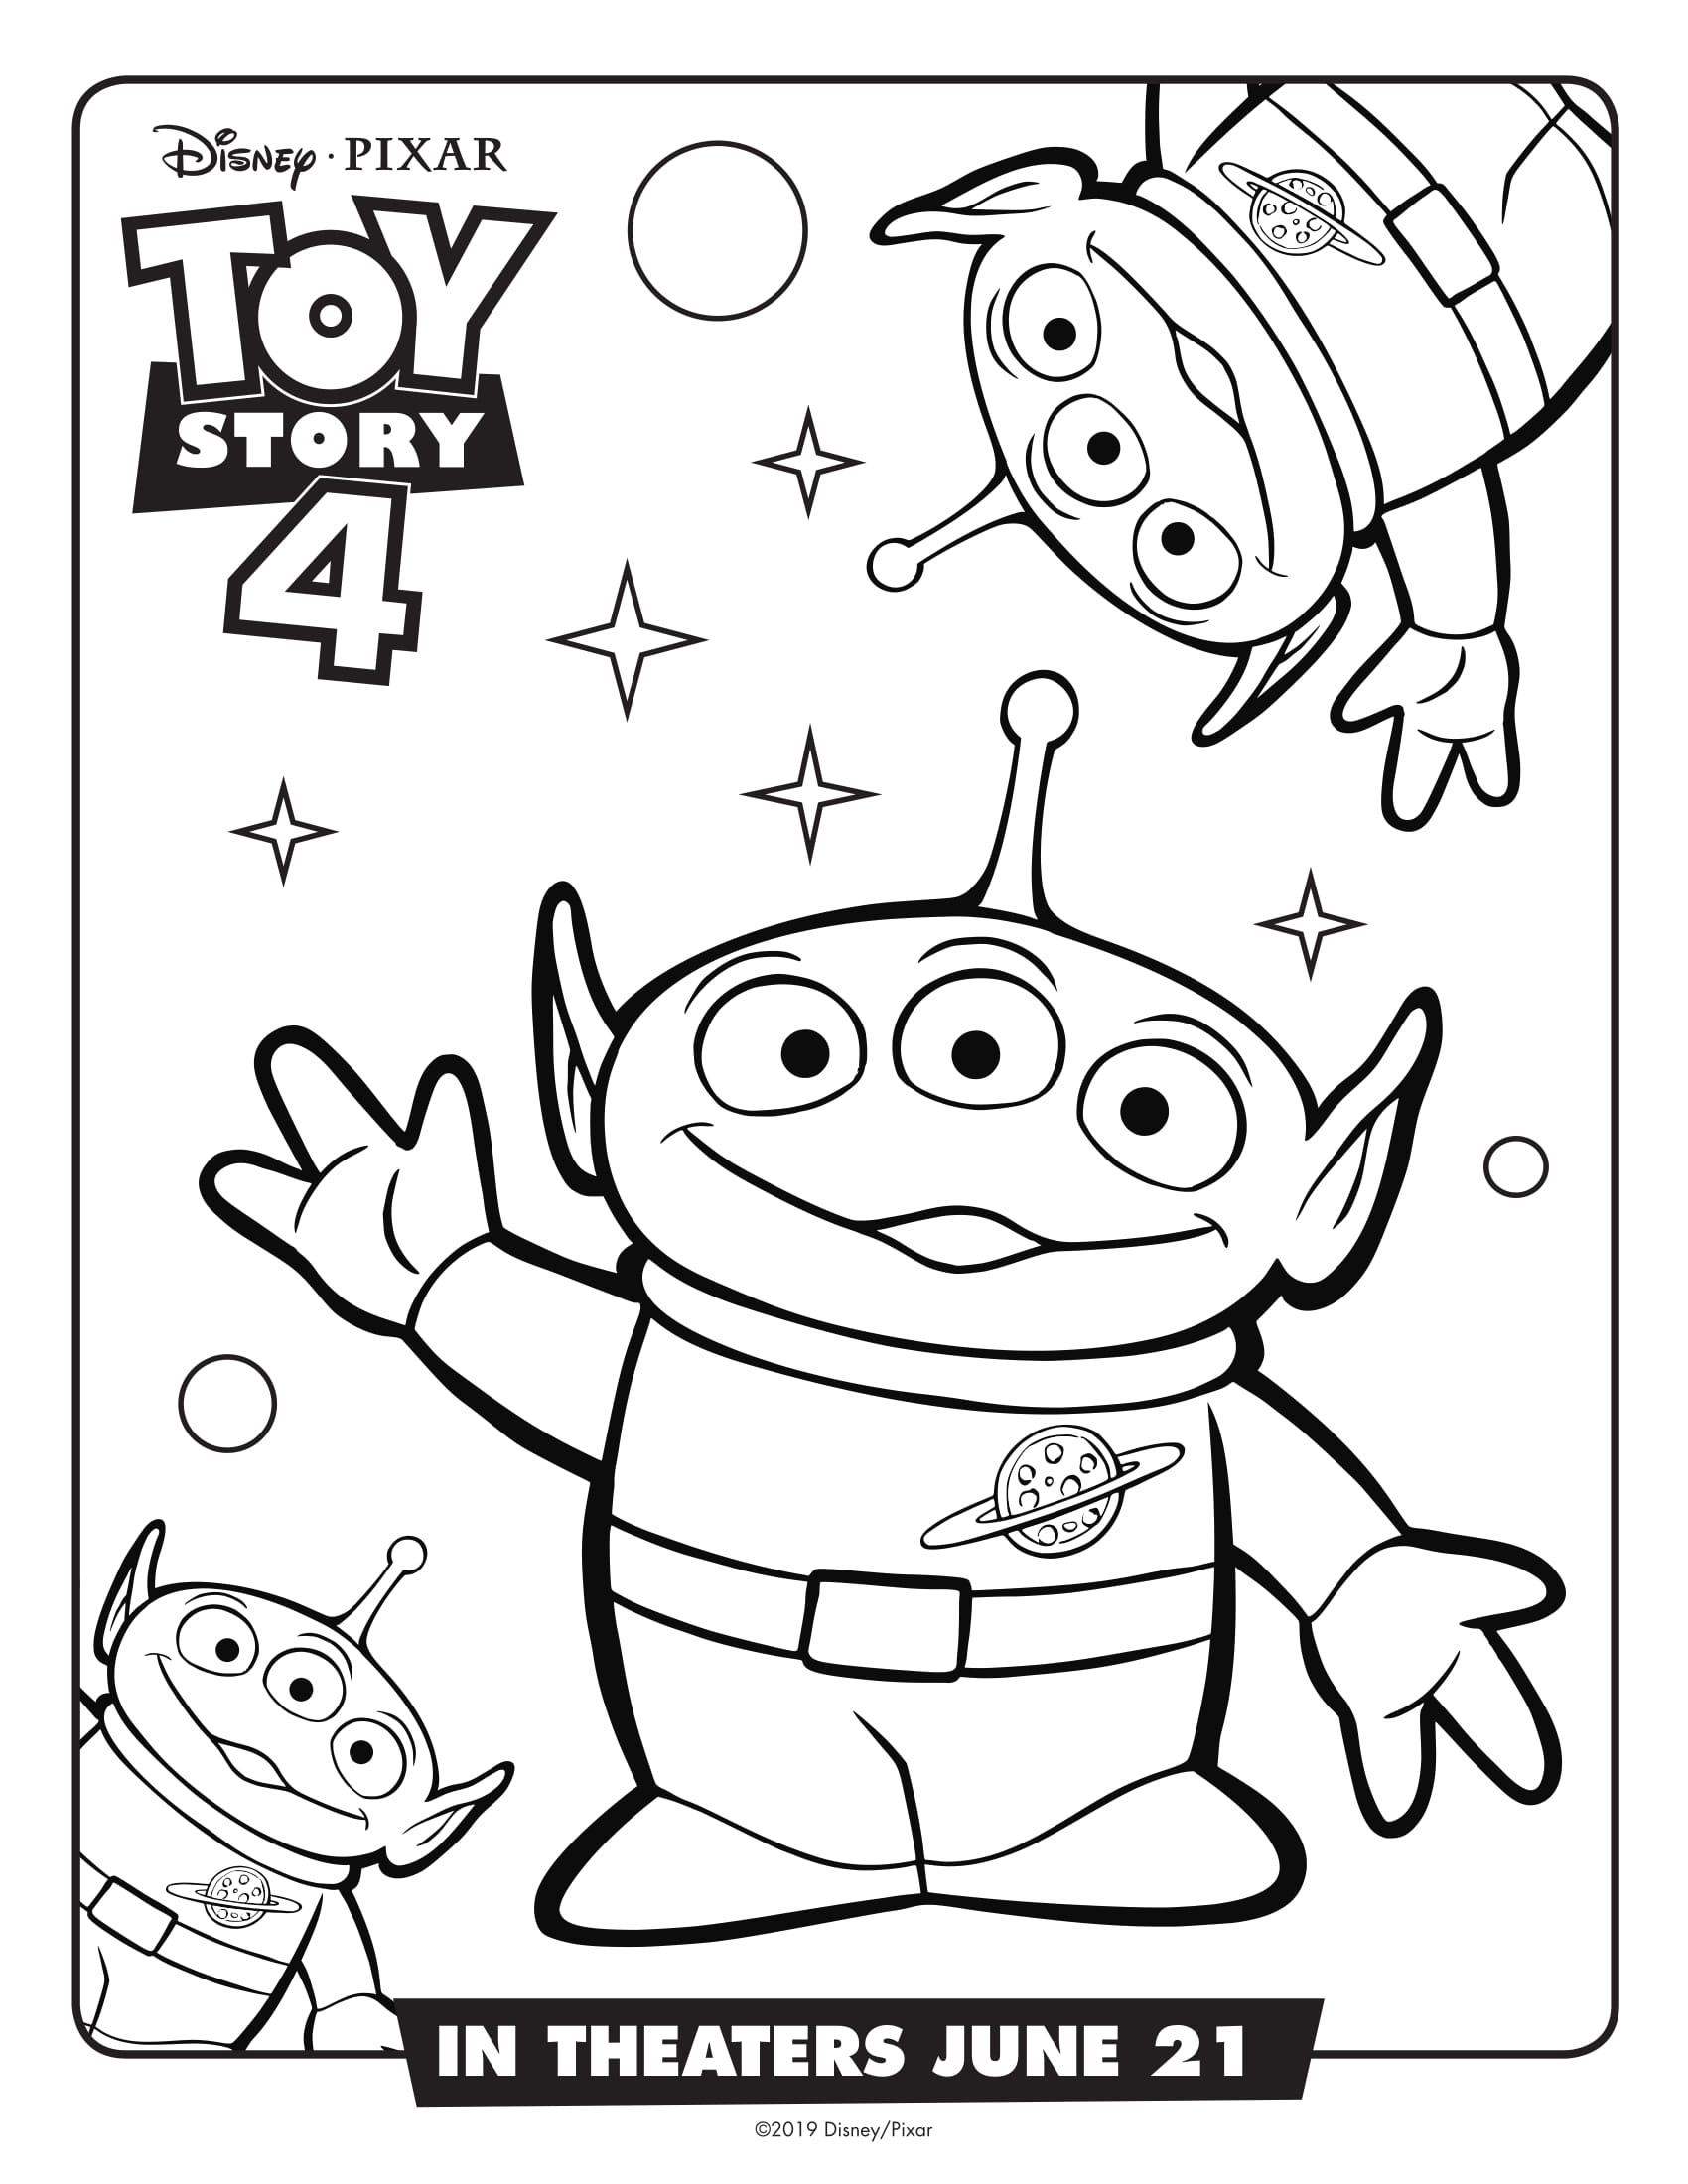 Toy Story 4 Coloring Pages - Best Coloring Pages For Kids